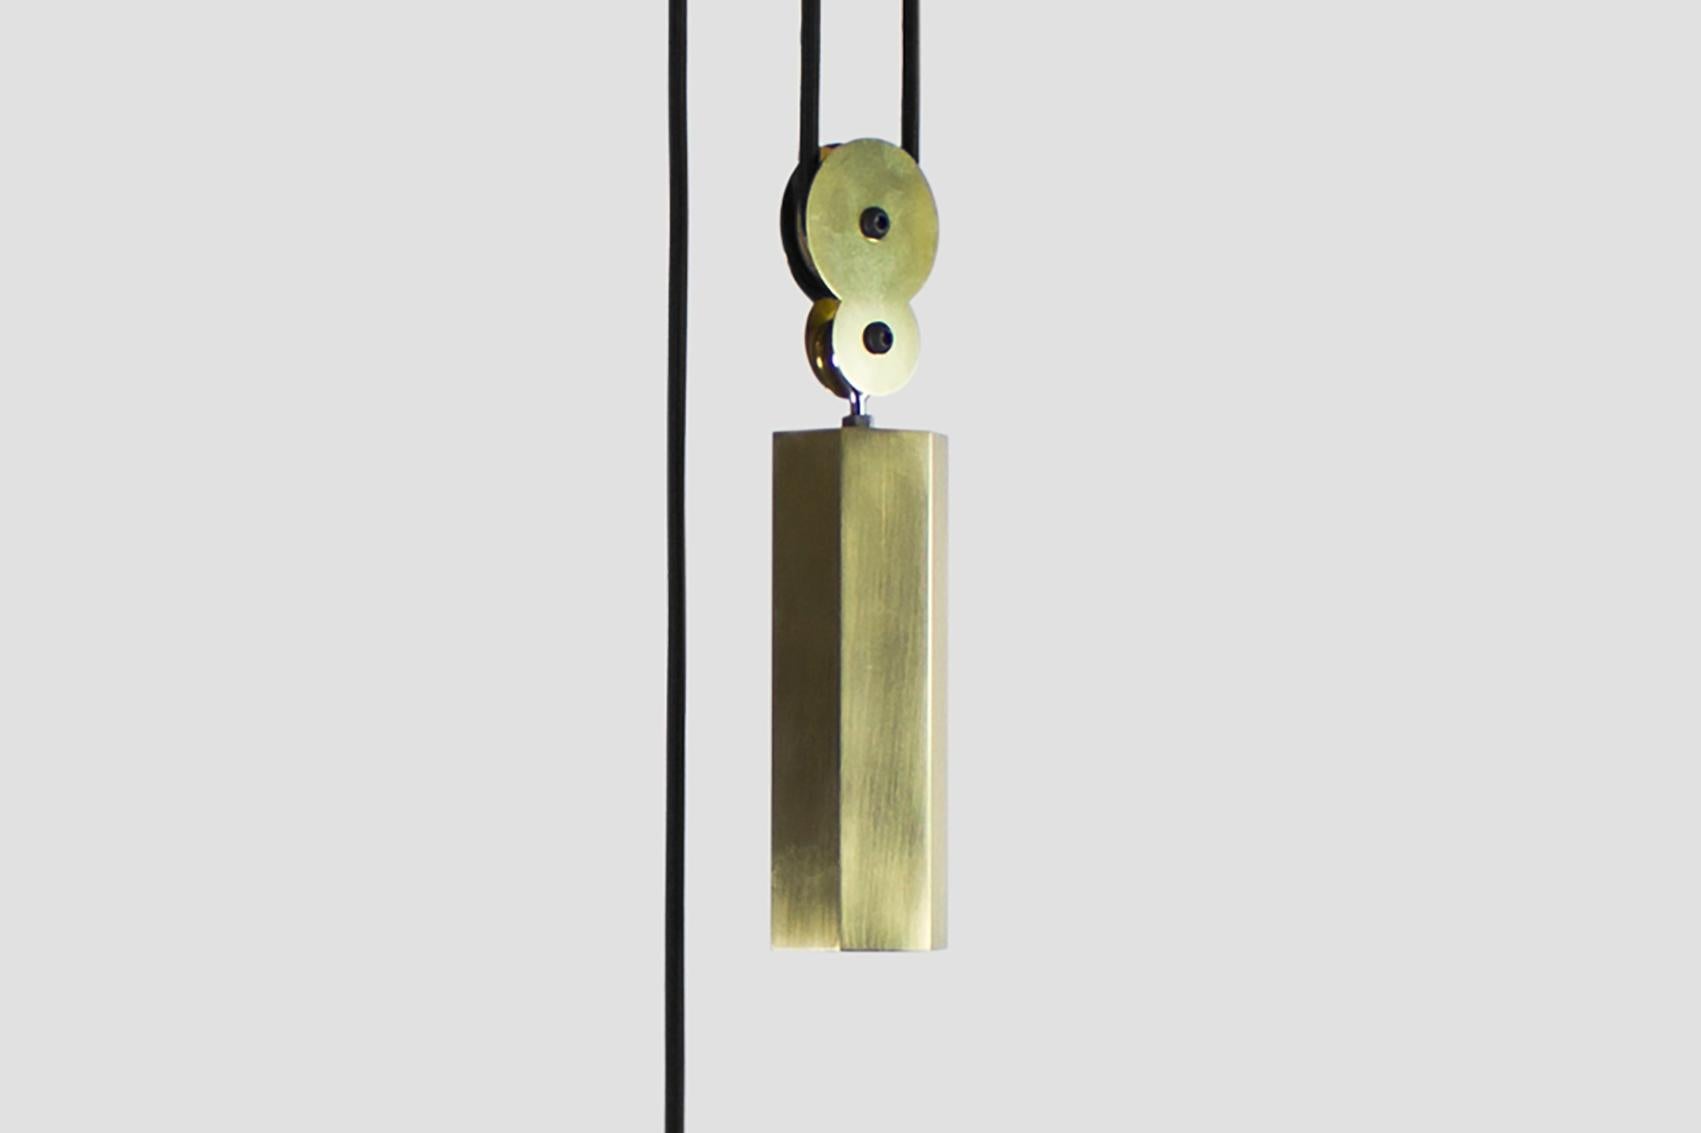 Up-Down light is a contemporary twist on the Classic Industrial age height adjustable pendant light.
A range of natural materials contrasted with simple geometric forms to create a light that mixes functionality with a bold design statement.
This